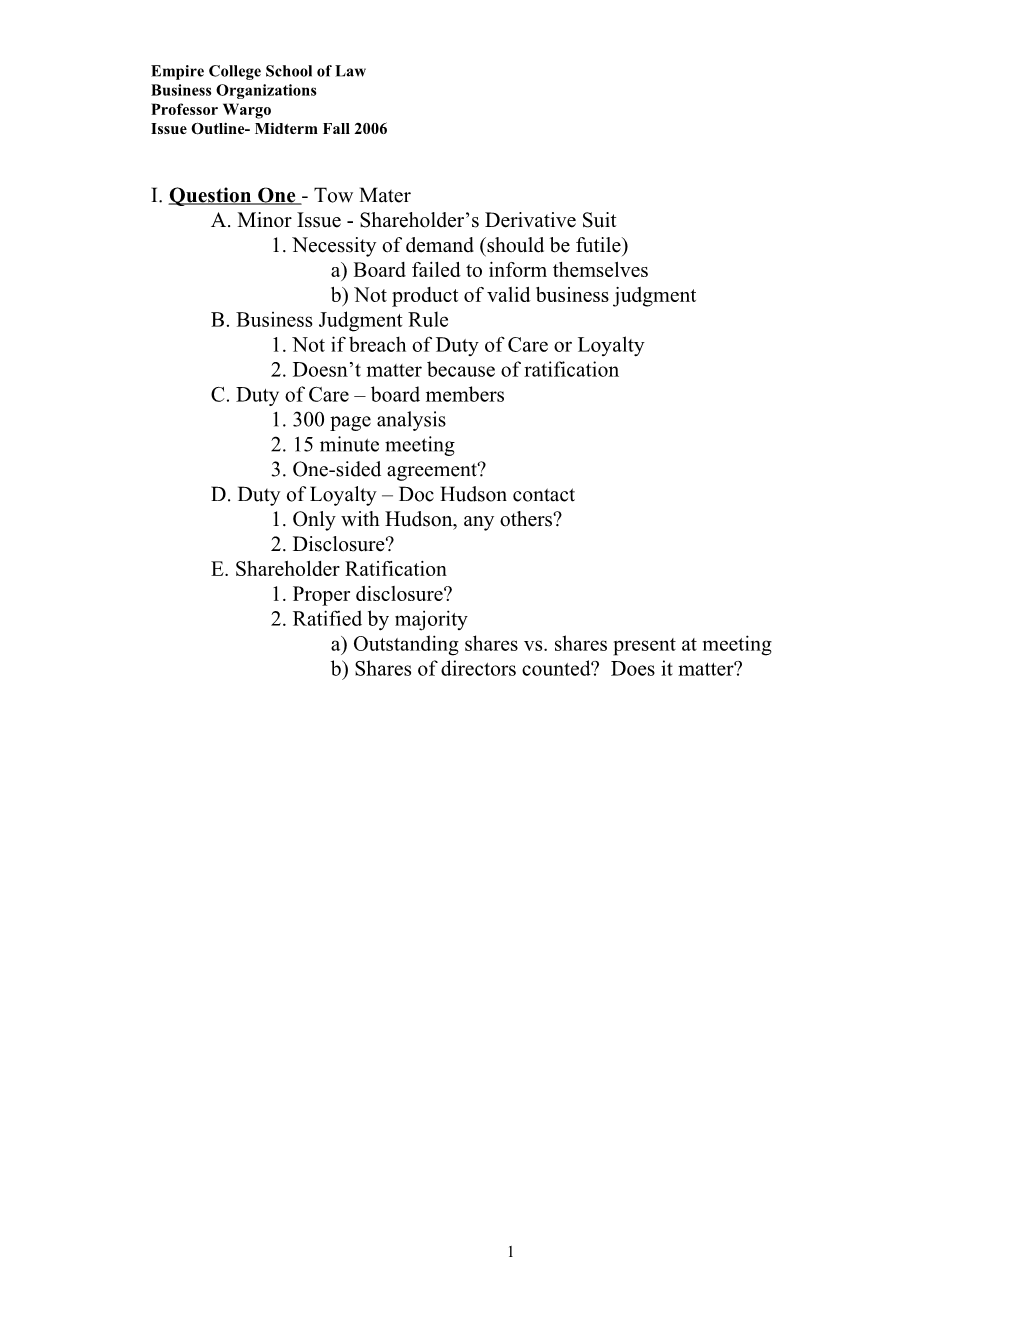 2006 Fall Business Organizations Midterm Issue Outline (00040040)